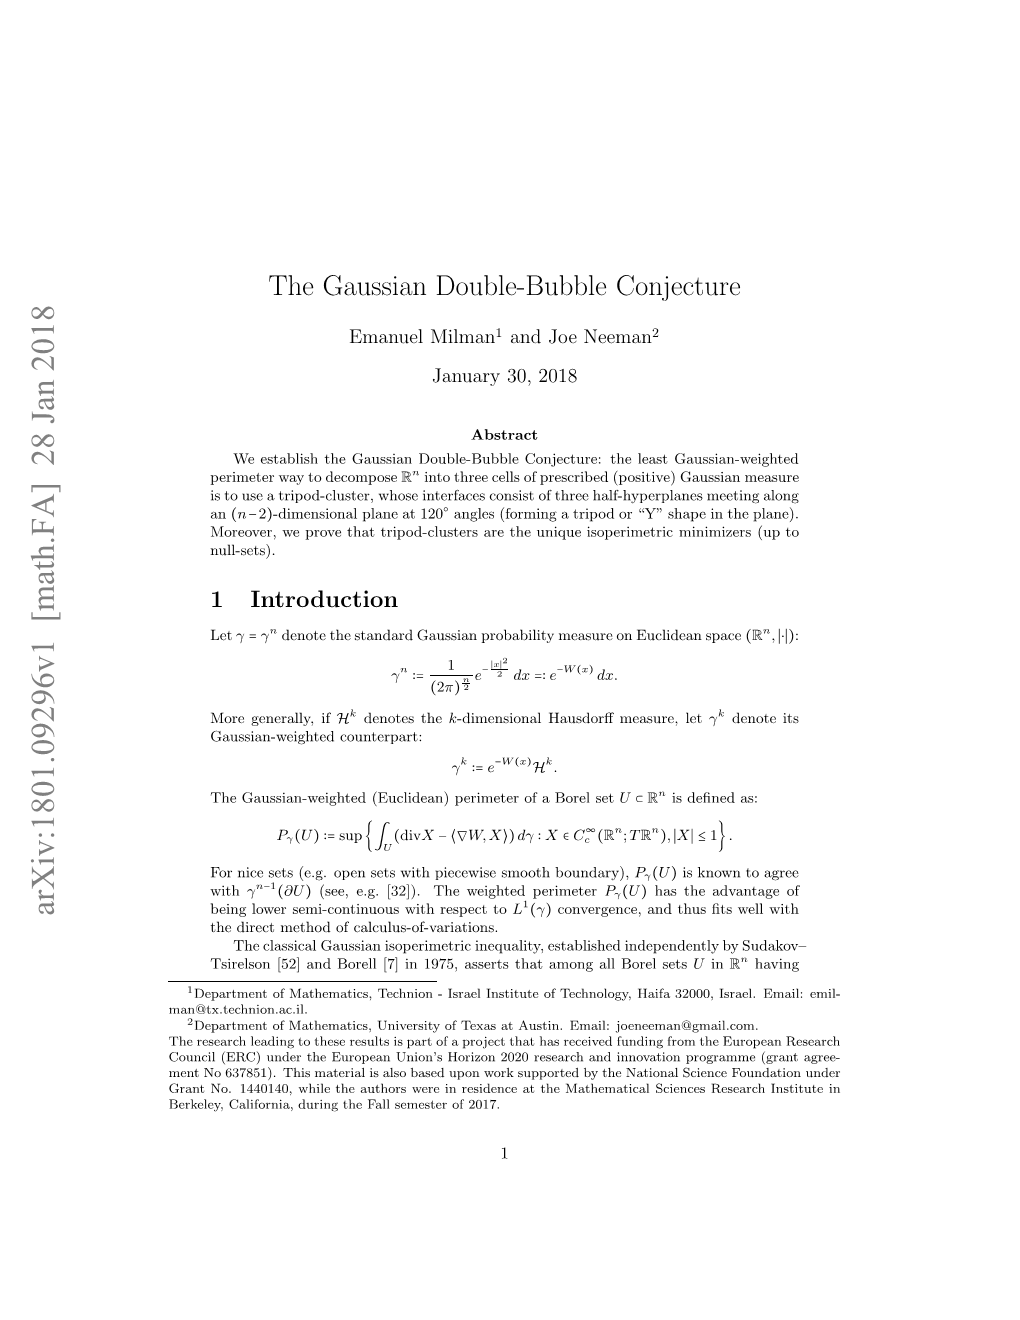 The Gaussian Double-Bubble Conjecture